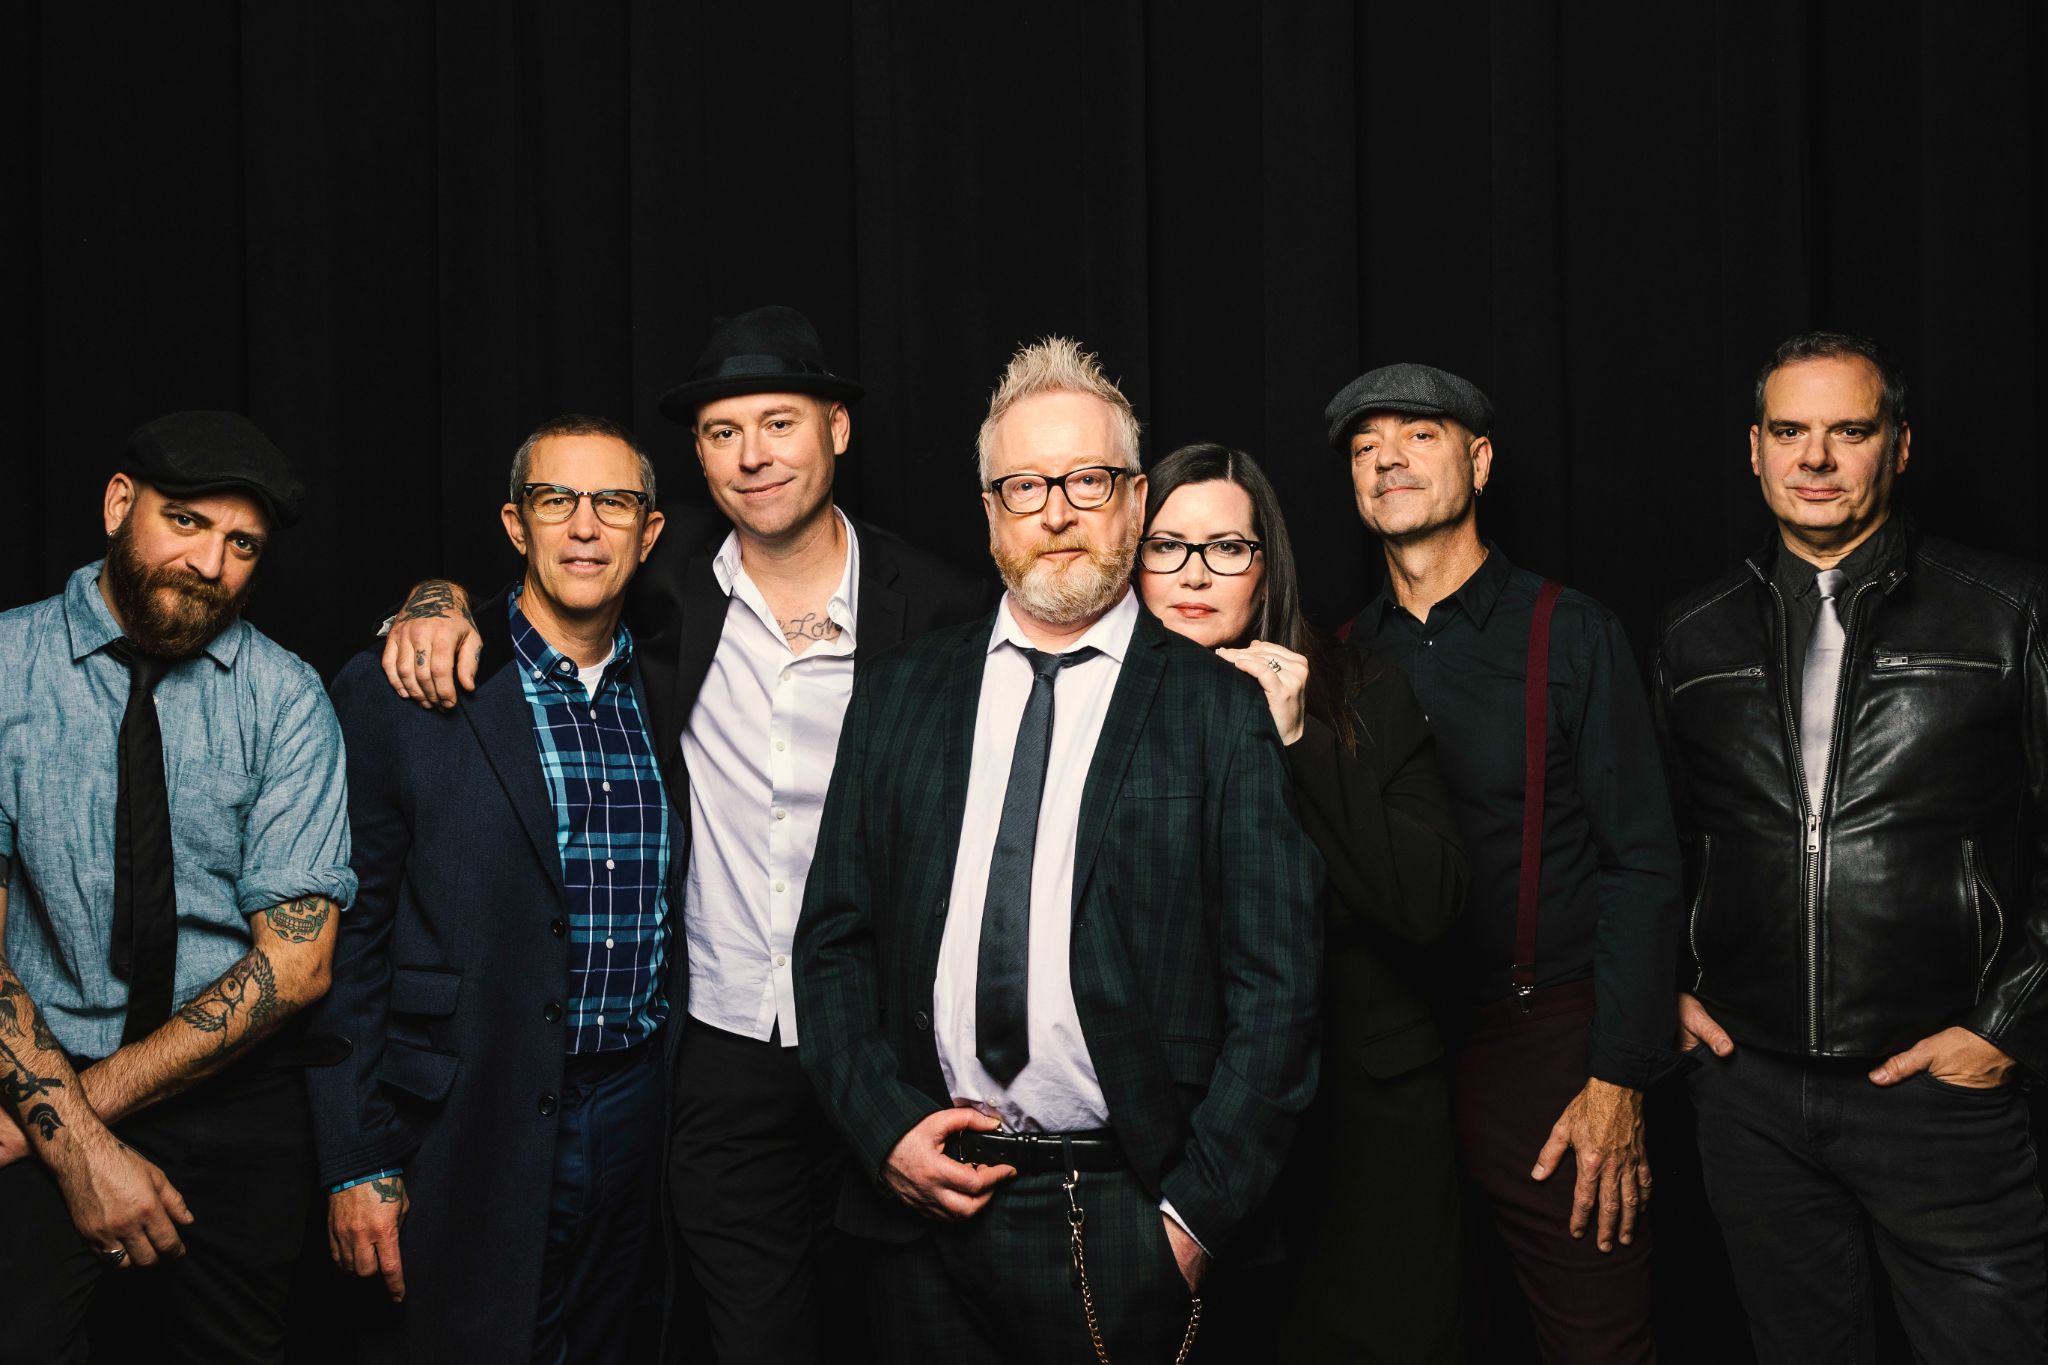 Boulder's St. Patrick's Day Comes Early with Flogging Molly